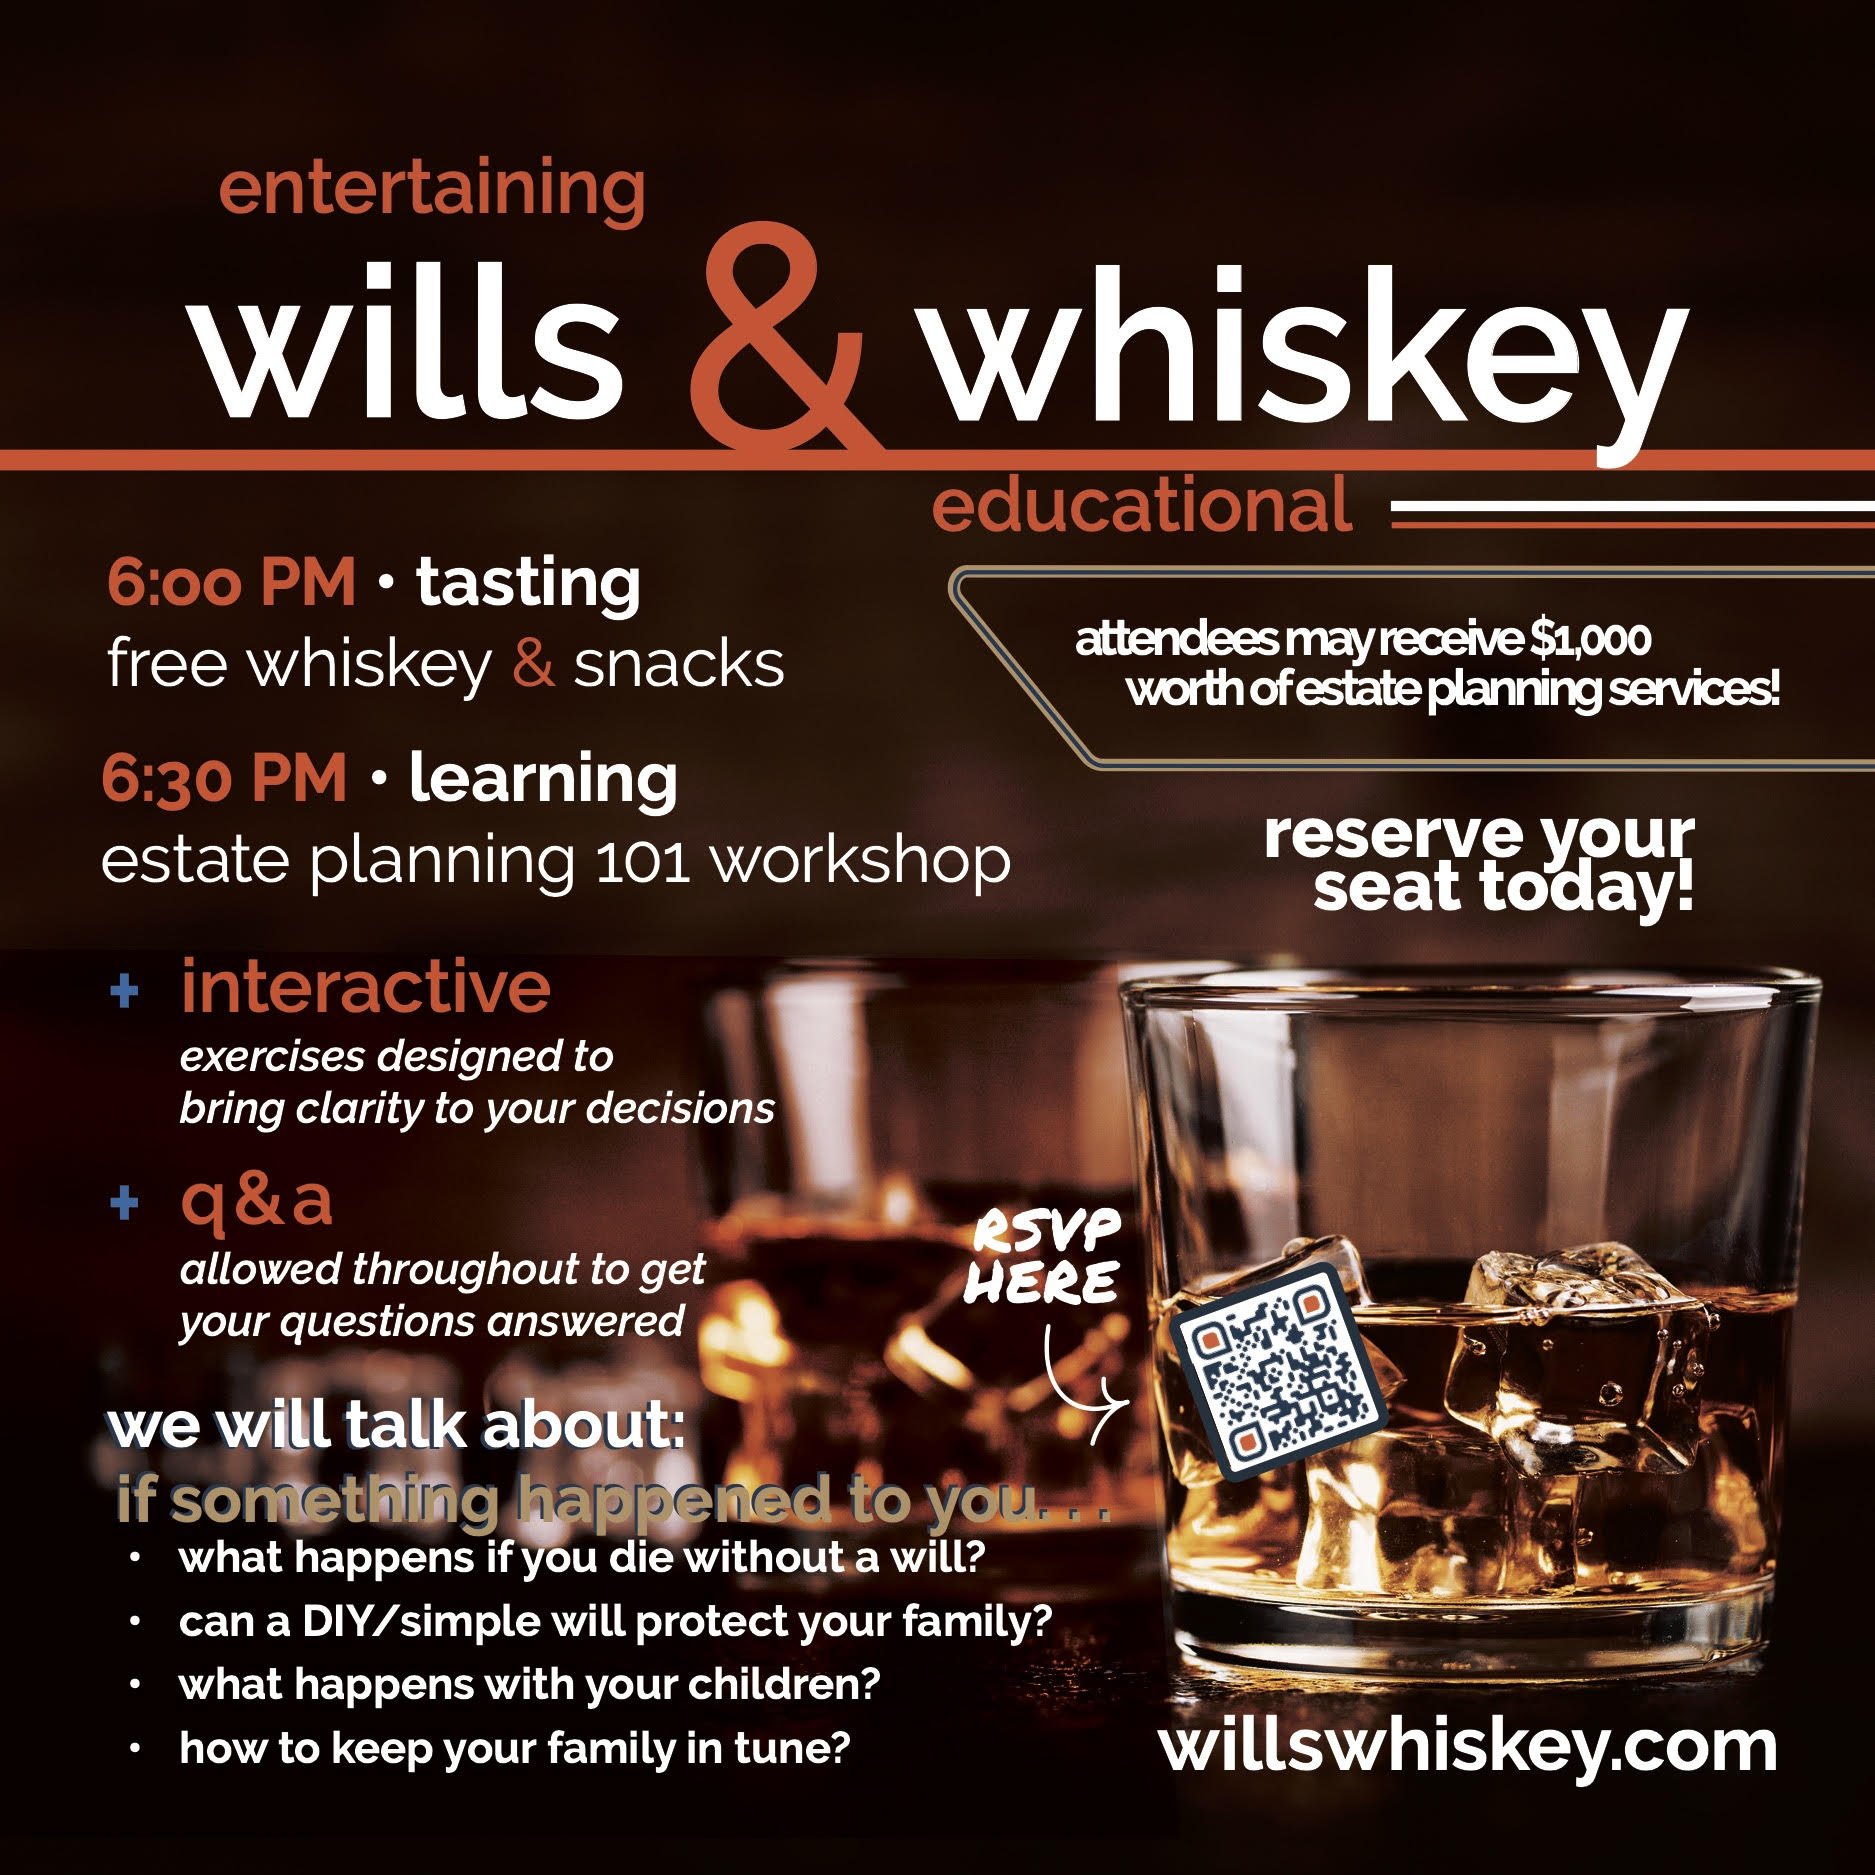 wills & whiskey in the woodlands montgomery county texas - estate planning 101 workshop.jpg